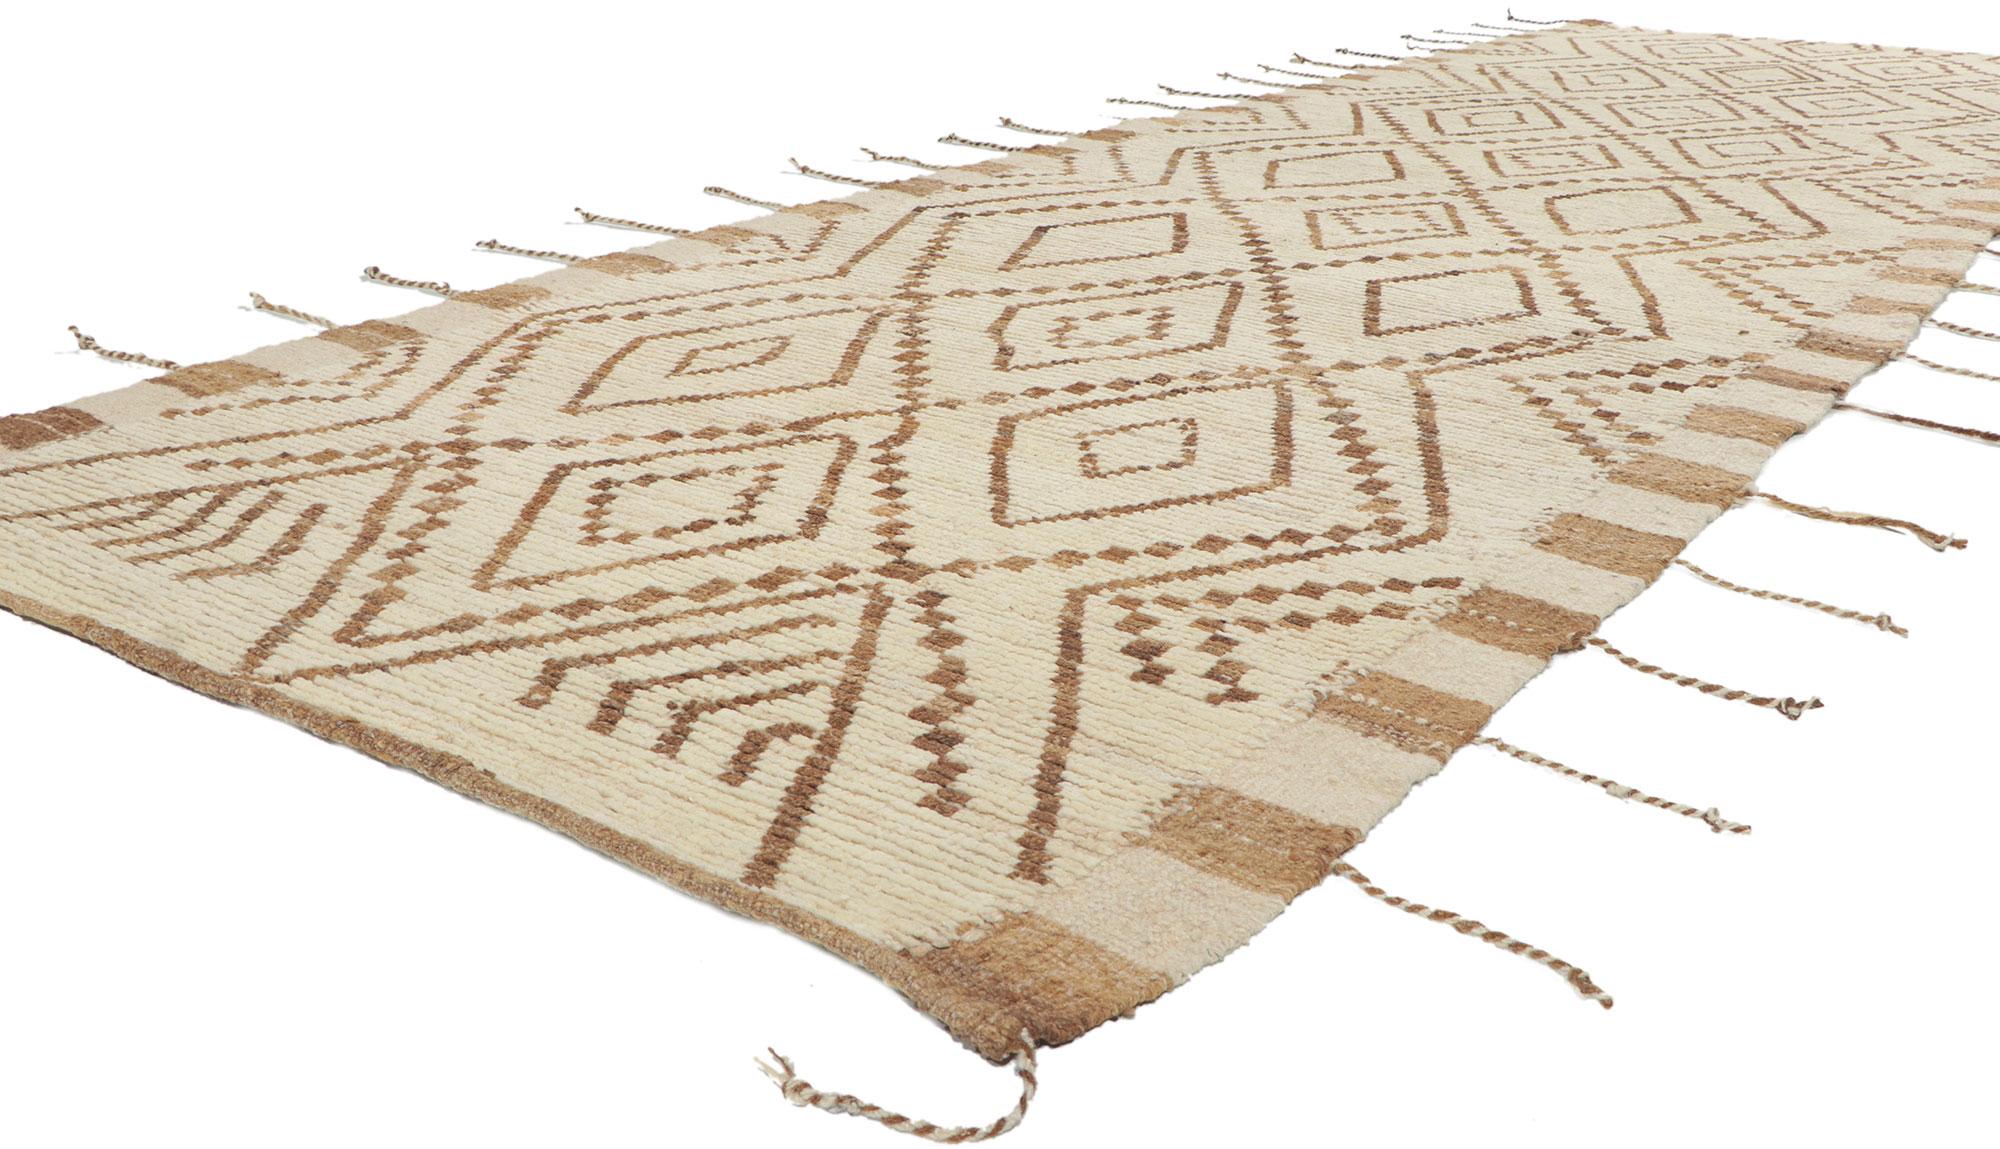 80779 new Contemporary Moroccan Runner, 04'10 x 15'04. With its subtle graphic appeal, incredible detail and texture, this hand knotted wool contemporary Moroccan runner is a captivating vision of woven beauty. The tribal pattern and earthy colorway